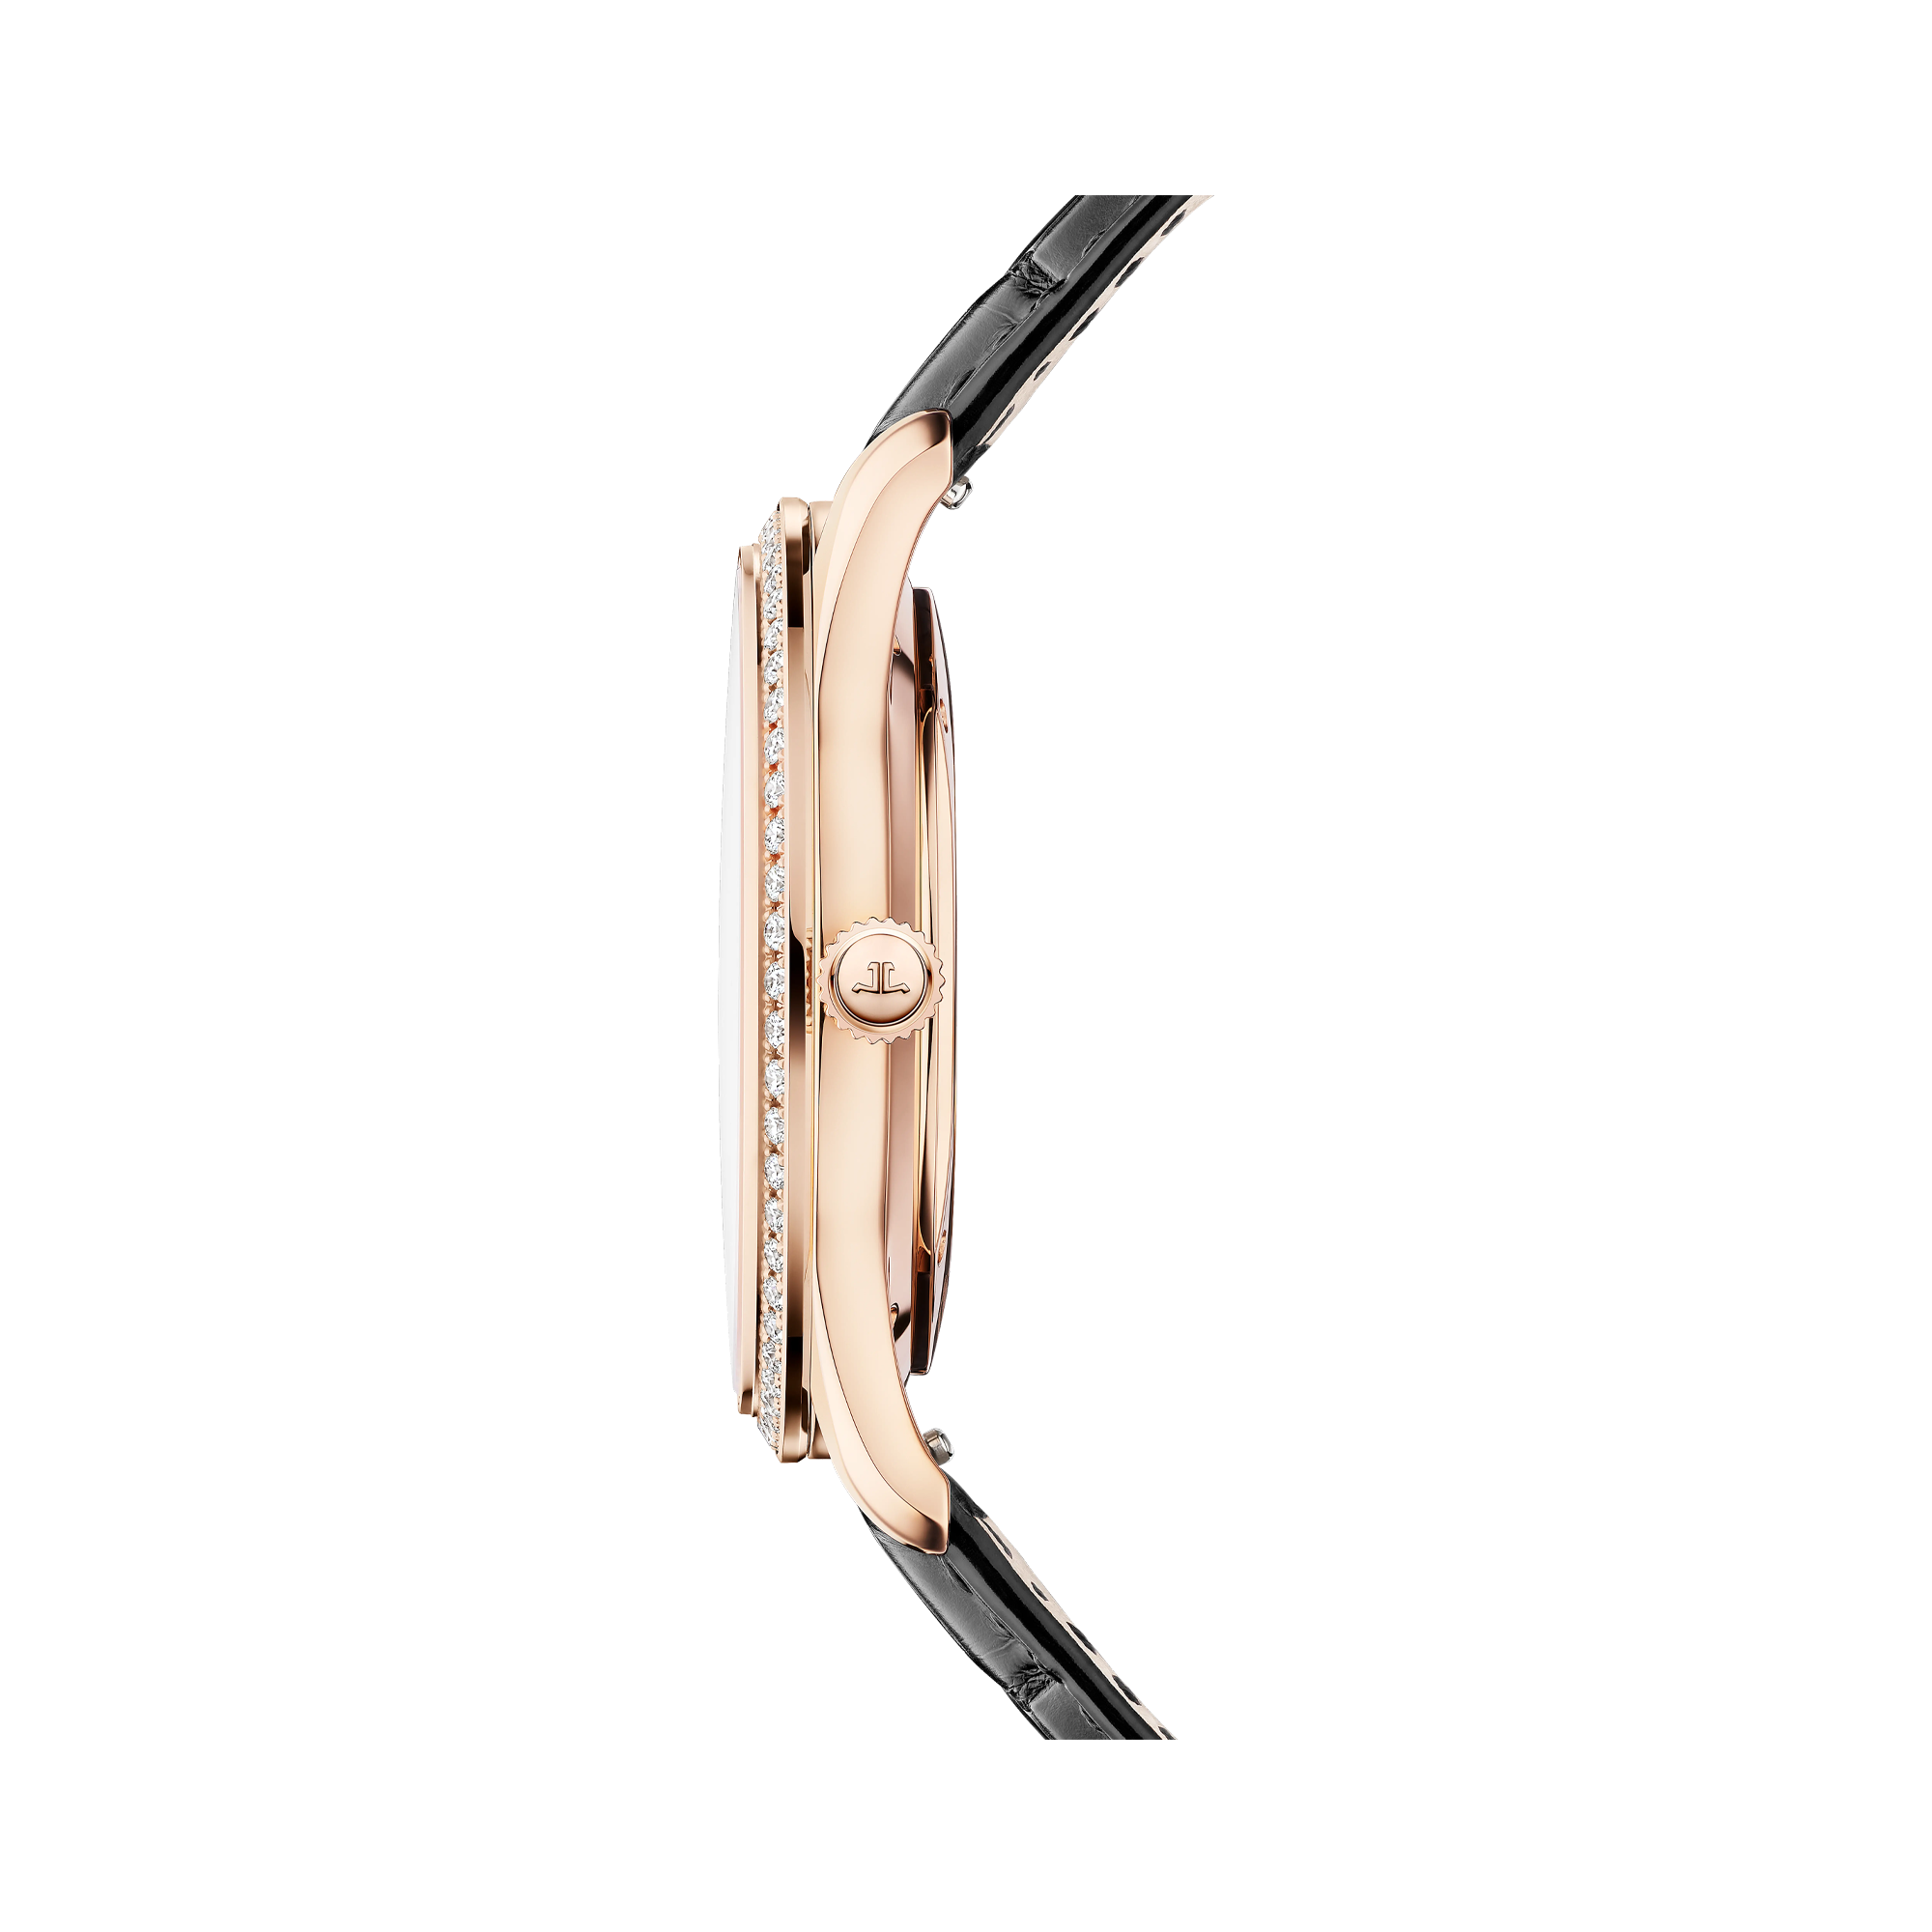 Jaeger-LeCoultre Master Ultra Thin 39mm, Beige Dial, Baton Numerals_3